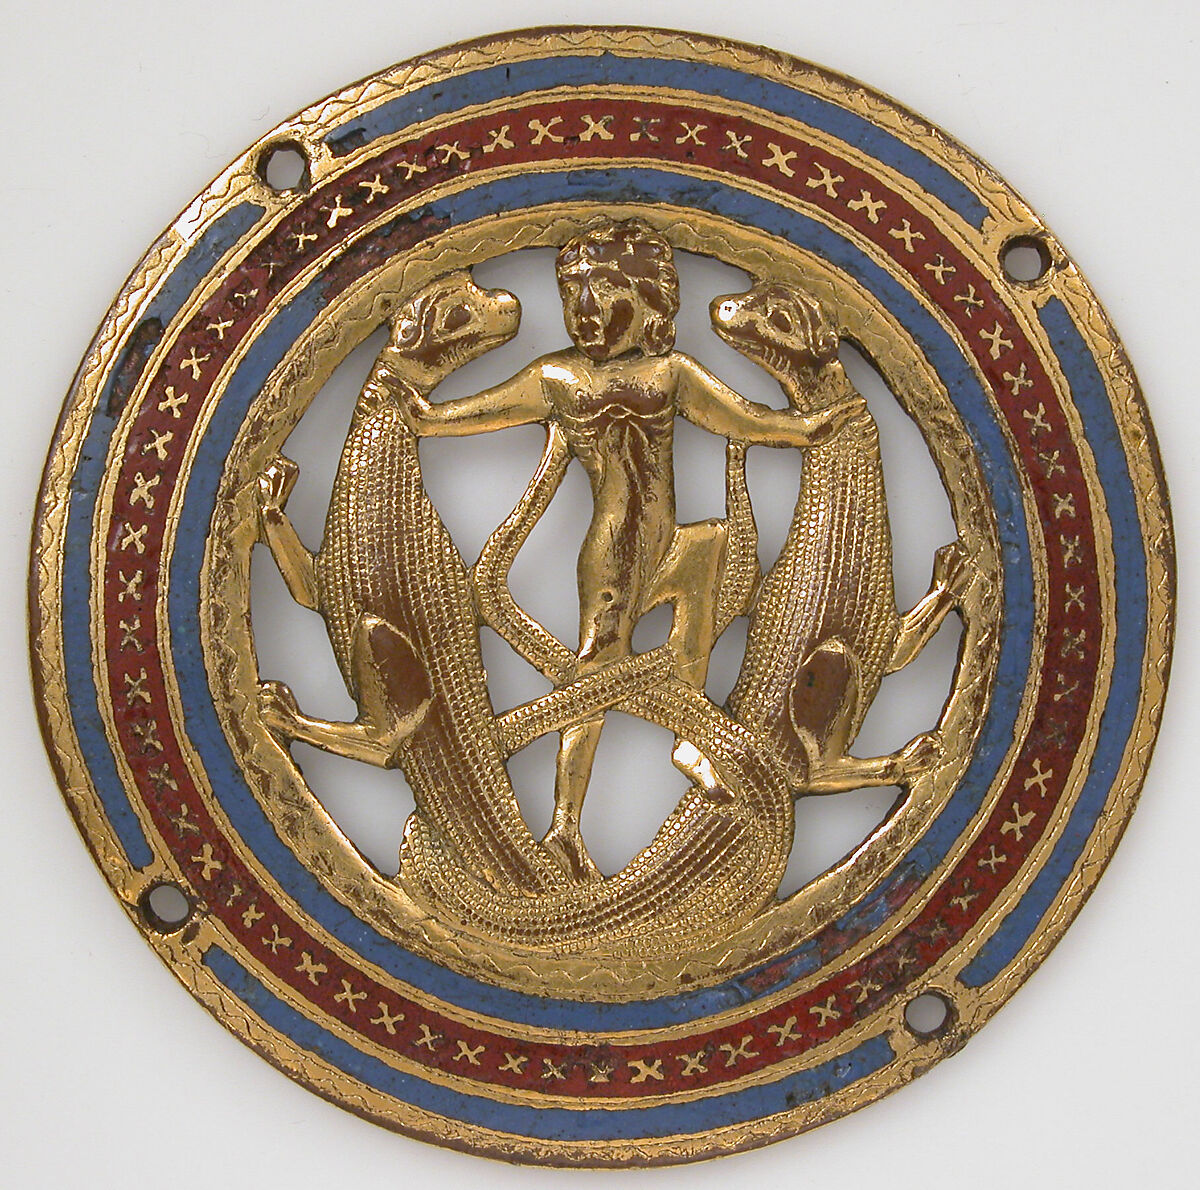 Medallion from a Coffret, Copper: pierced, repoussé, chased, engraved, scraped, stamped, and gilt; champlevé enamel: medium blue and red., French 